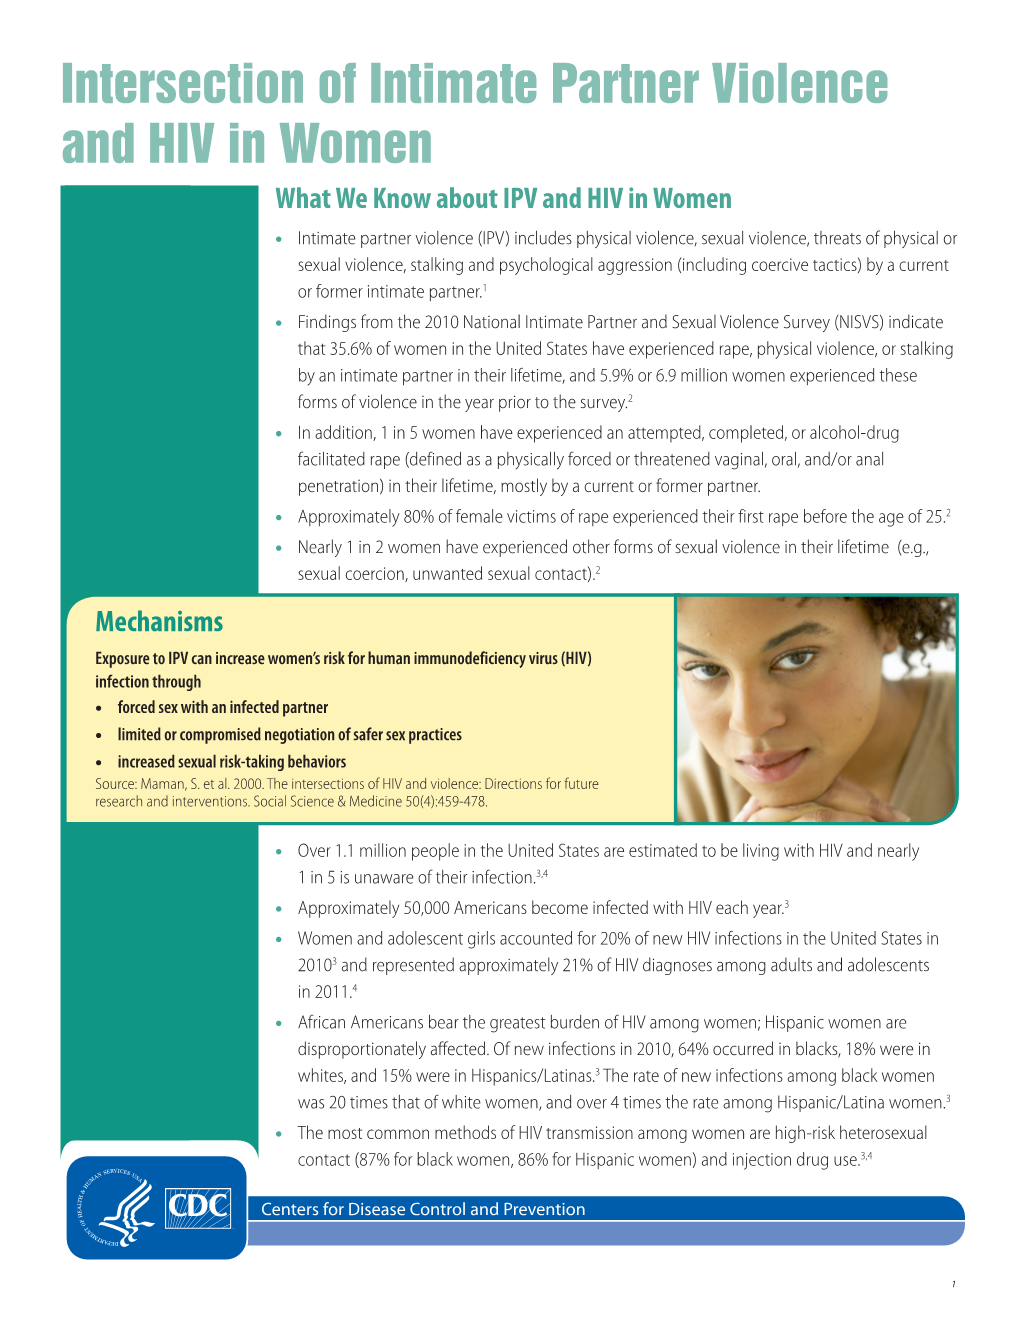 Intersection of Intimate Partner Violence and HIV in Women